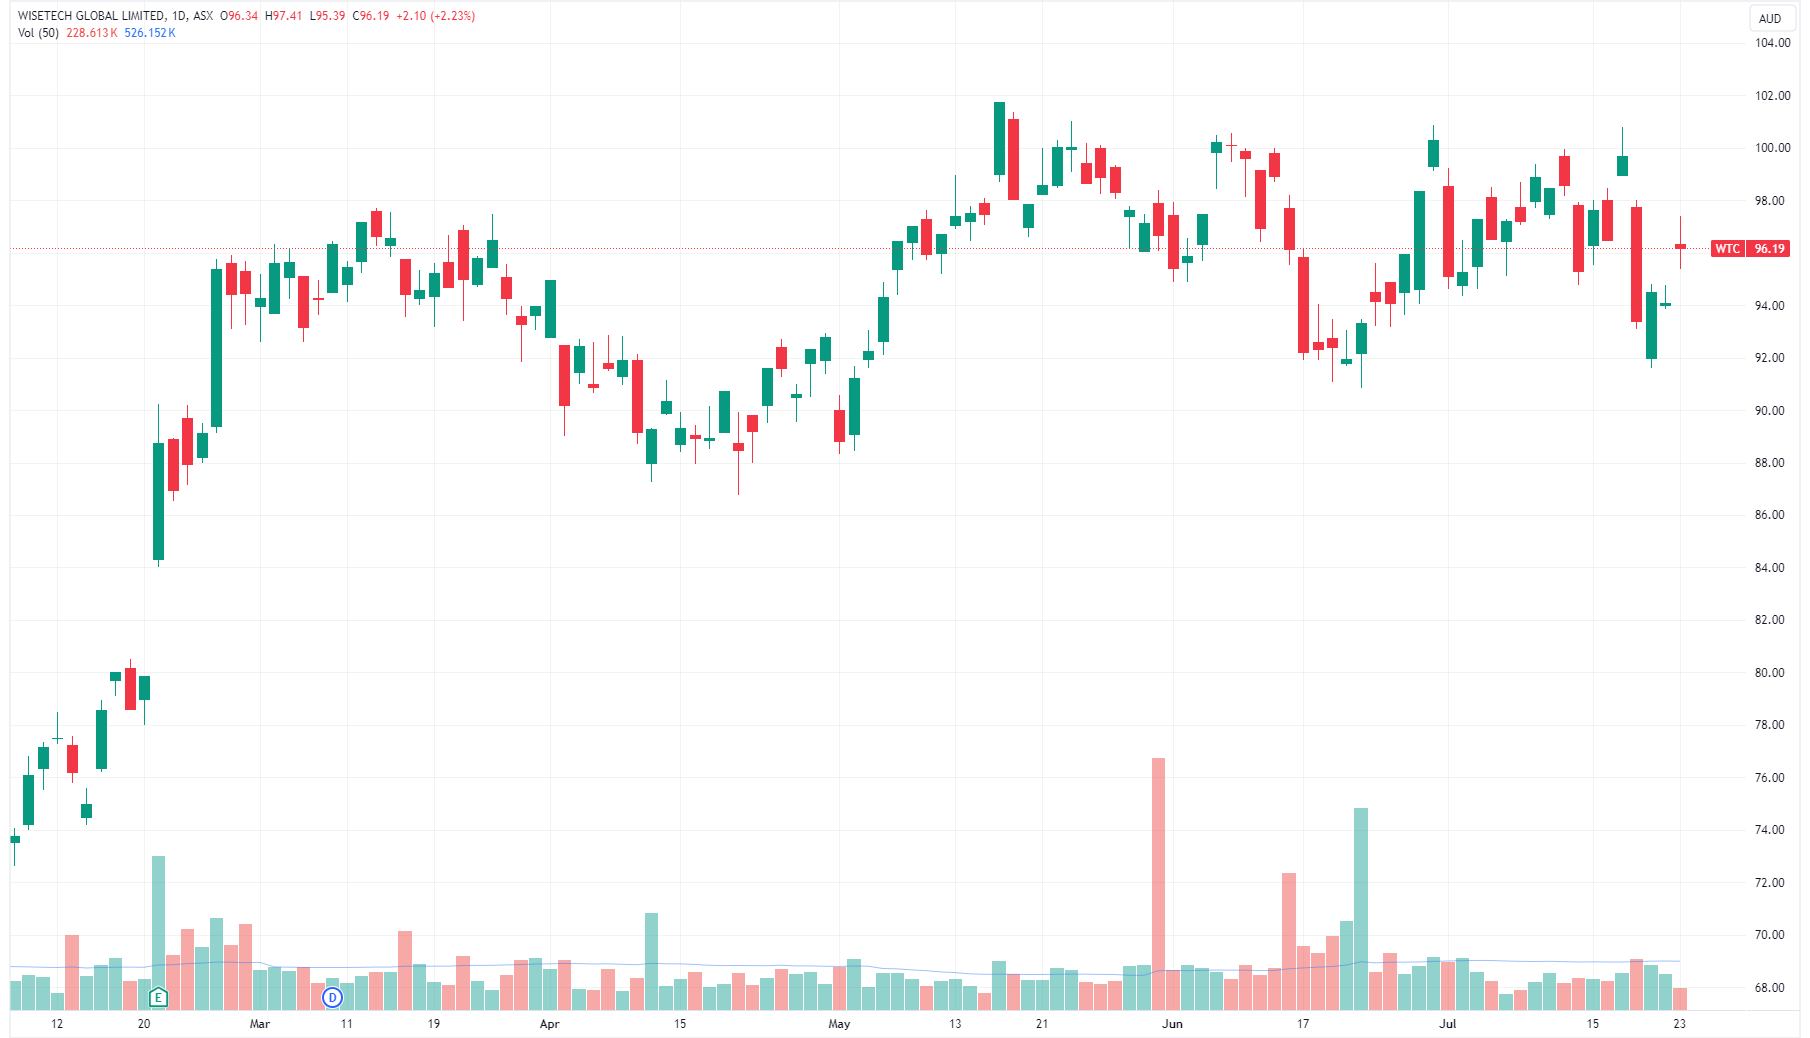 Wisetech rallied 11.1% on the day of results and gained another 7.3% over the next four sessions (Source: TradingView)